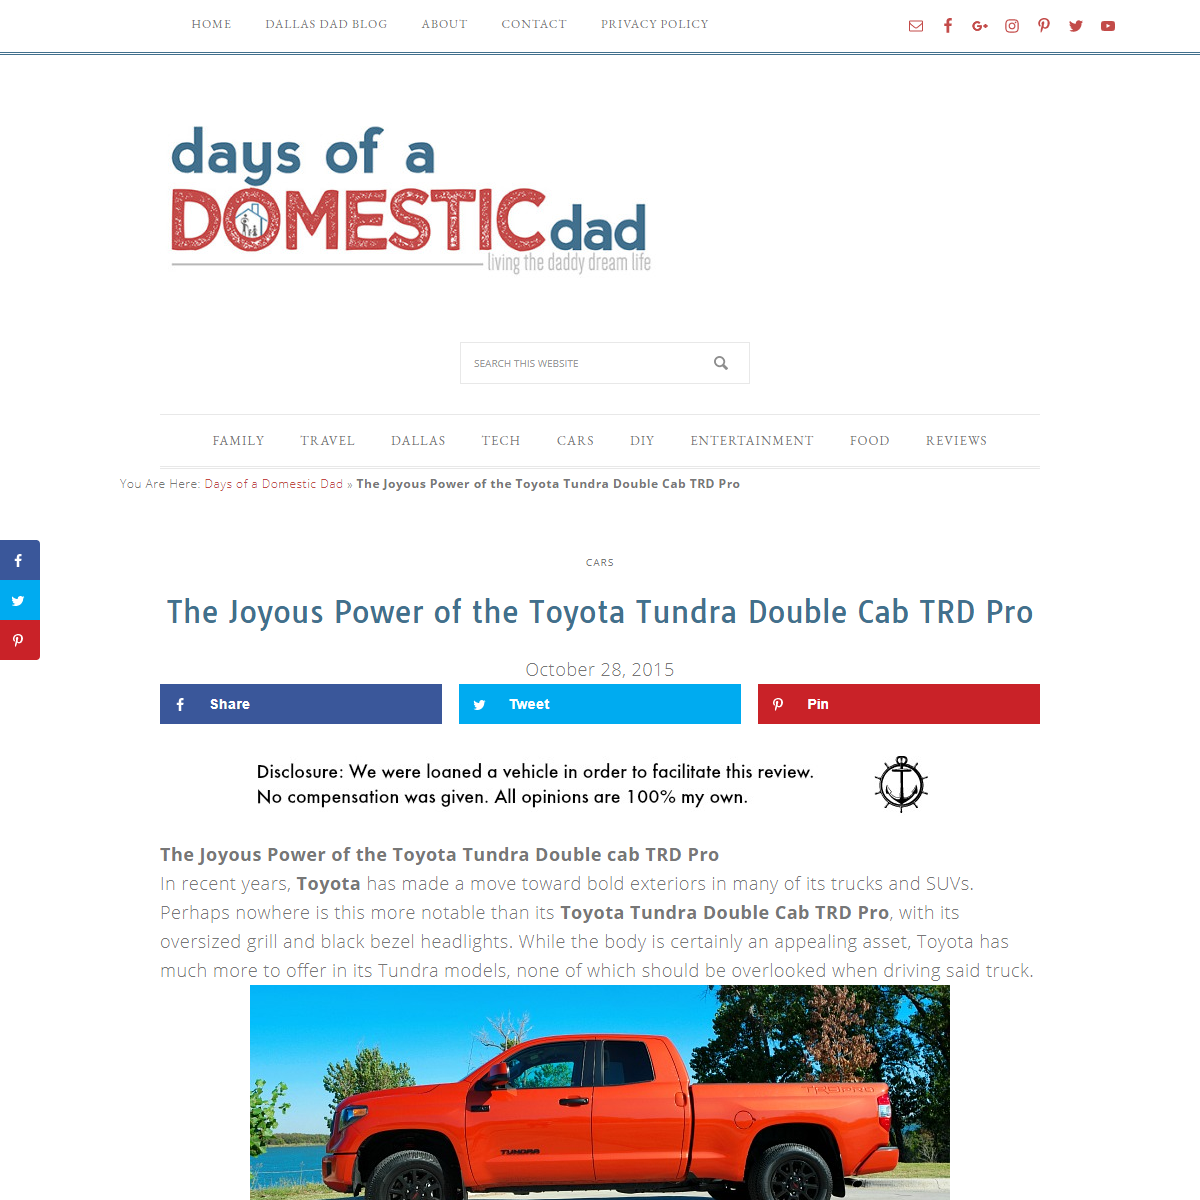 A complete backup of https://daysofadomesticdad.com/the-joyous-power-of-the-toyota-tundra-double-cab-trd-pro/